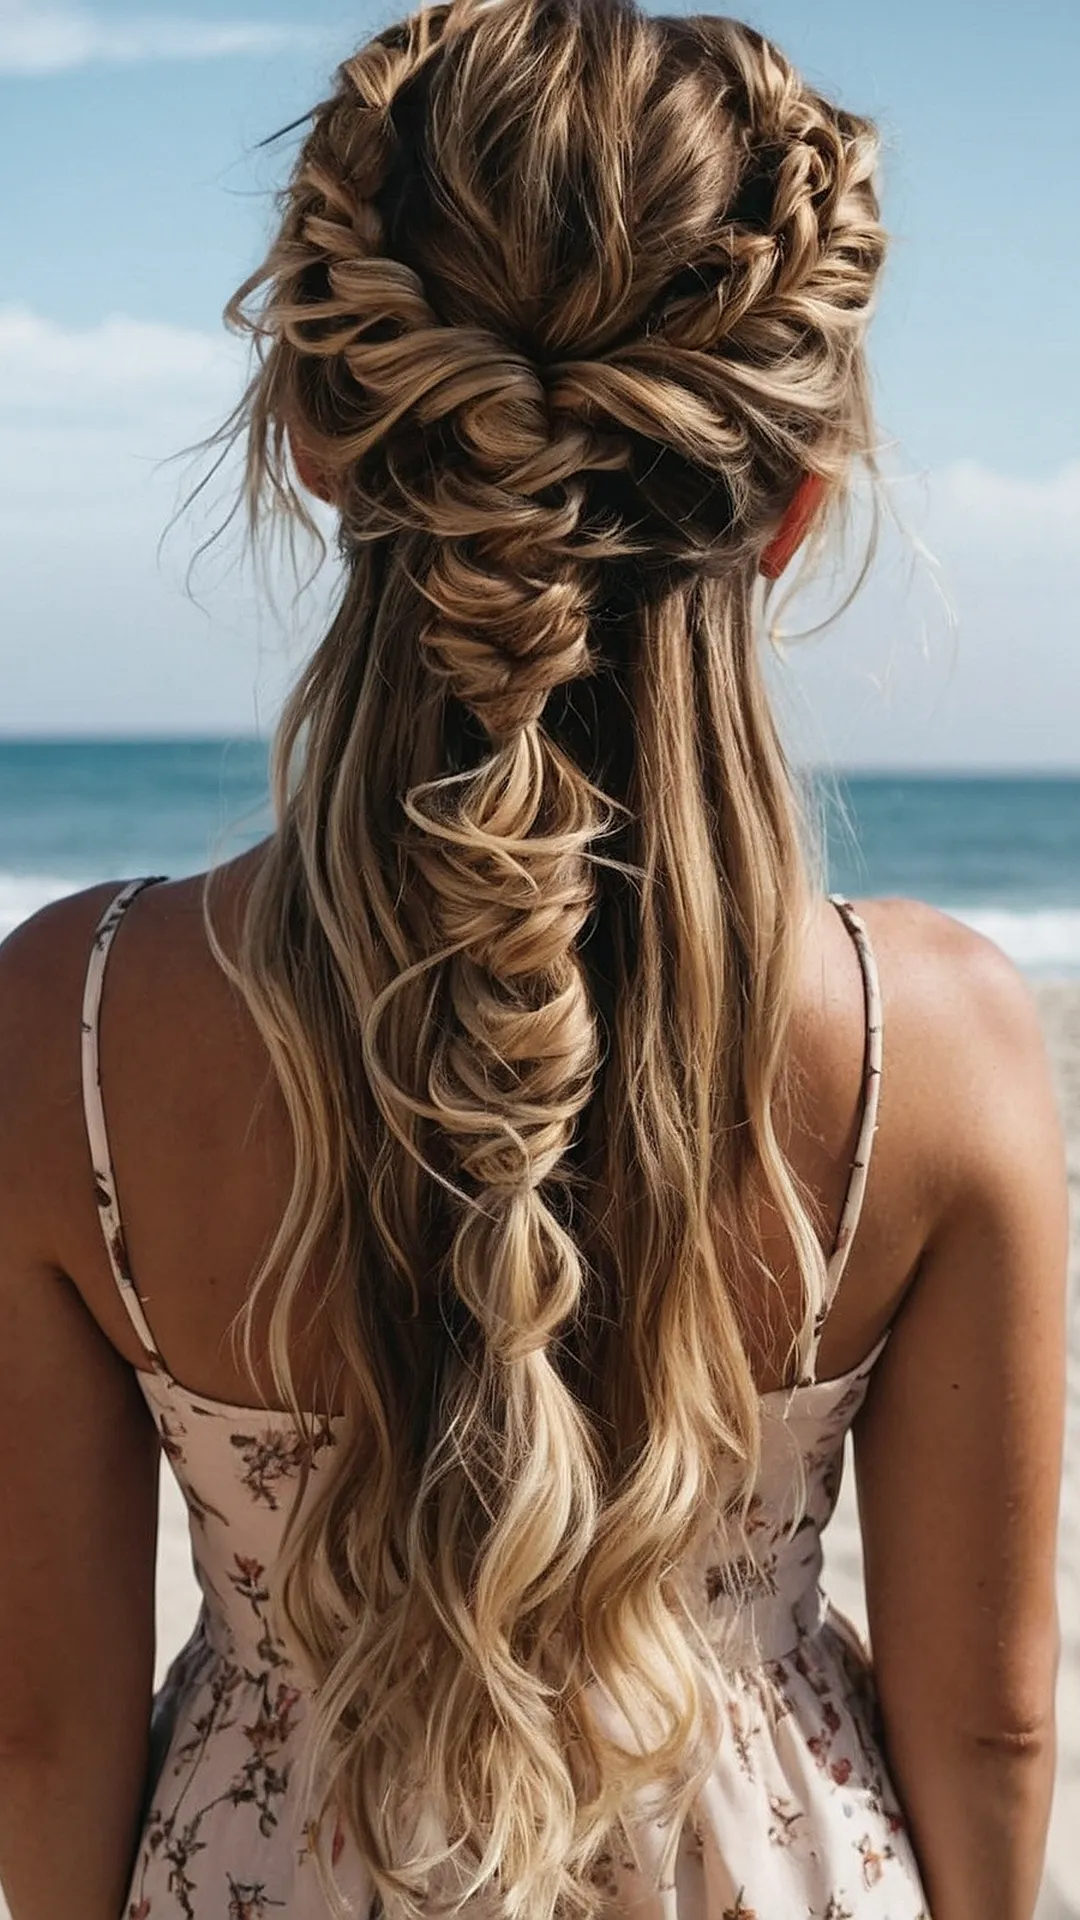 Poolside Hair Perfection